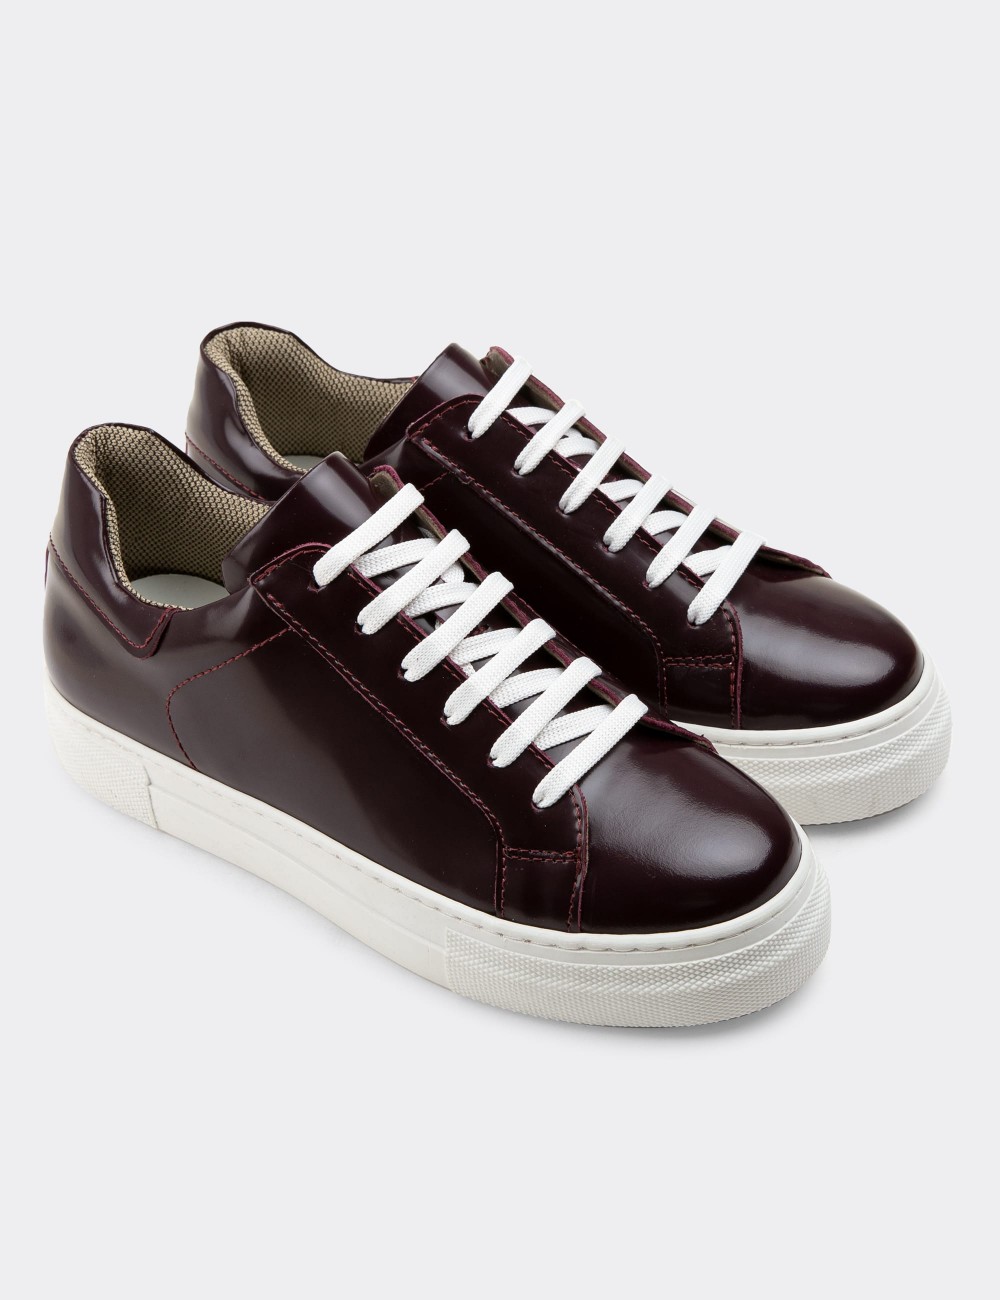 Burgundy  Leather Sneakers - Z1681ZBRDC08